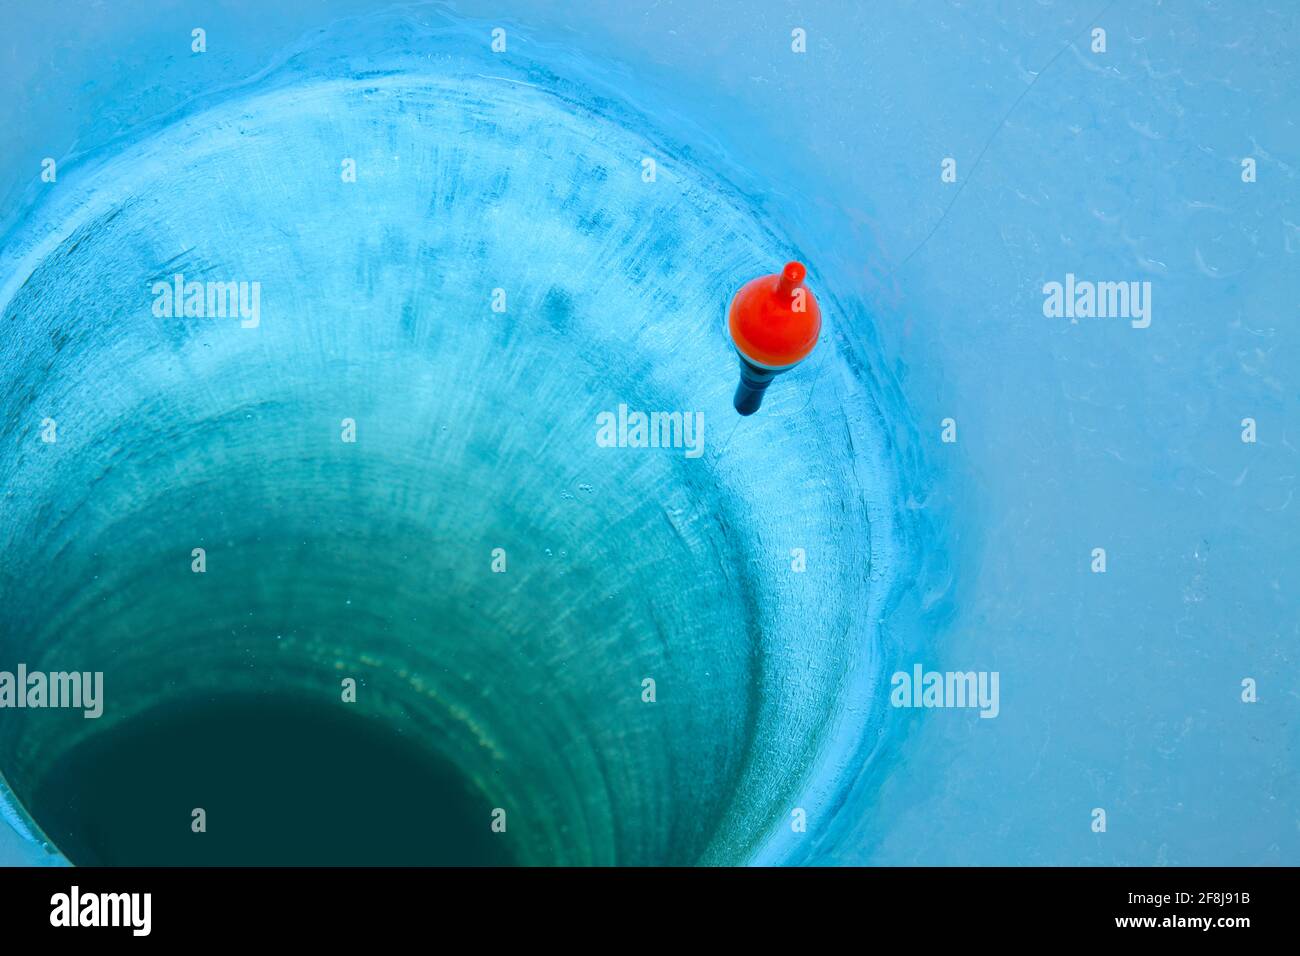 Red bobber and fishing line in an ice fishing hole in a Minnesota lake Stock Photo